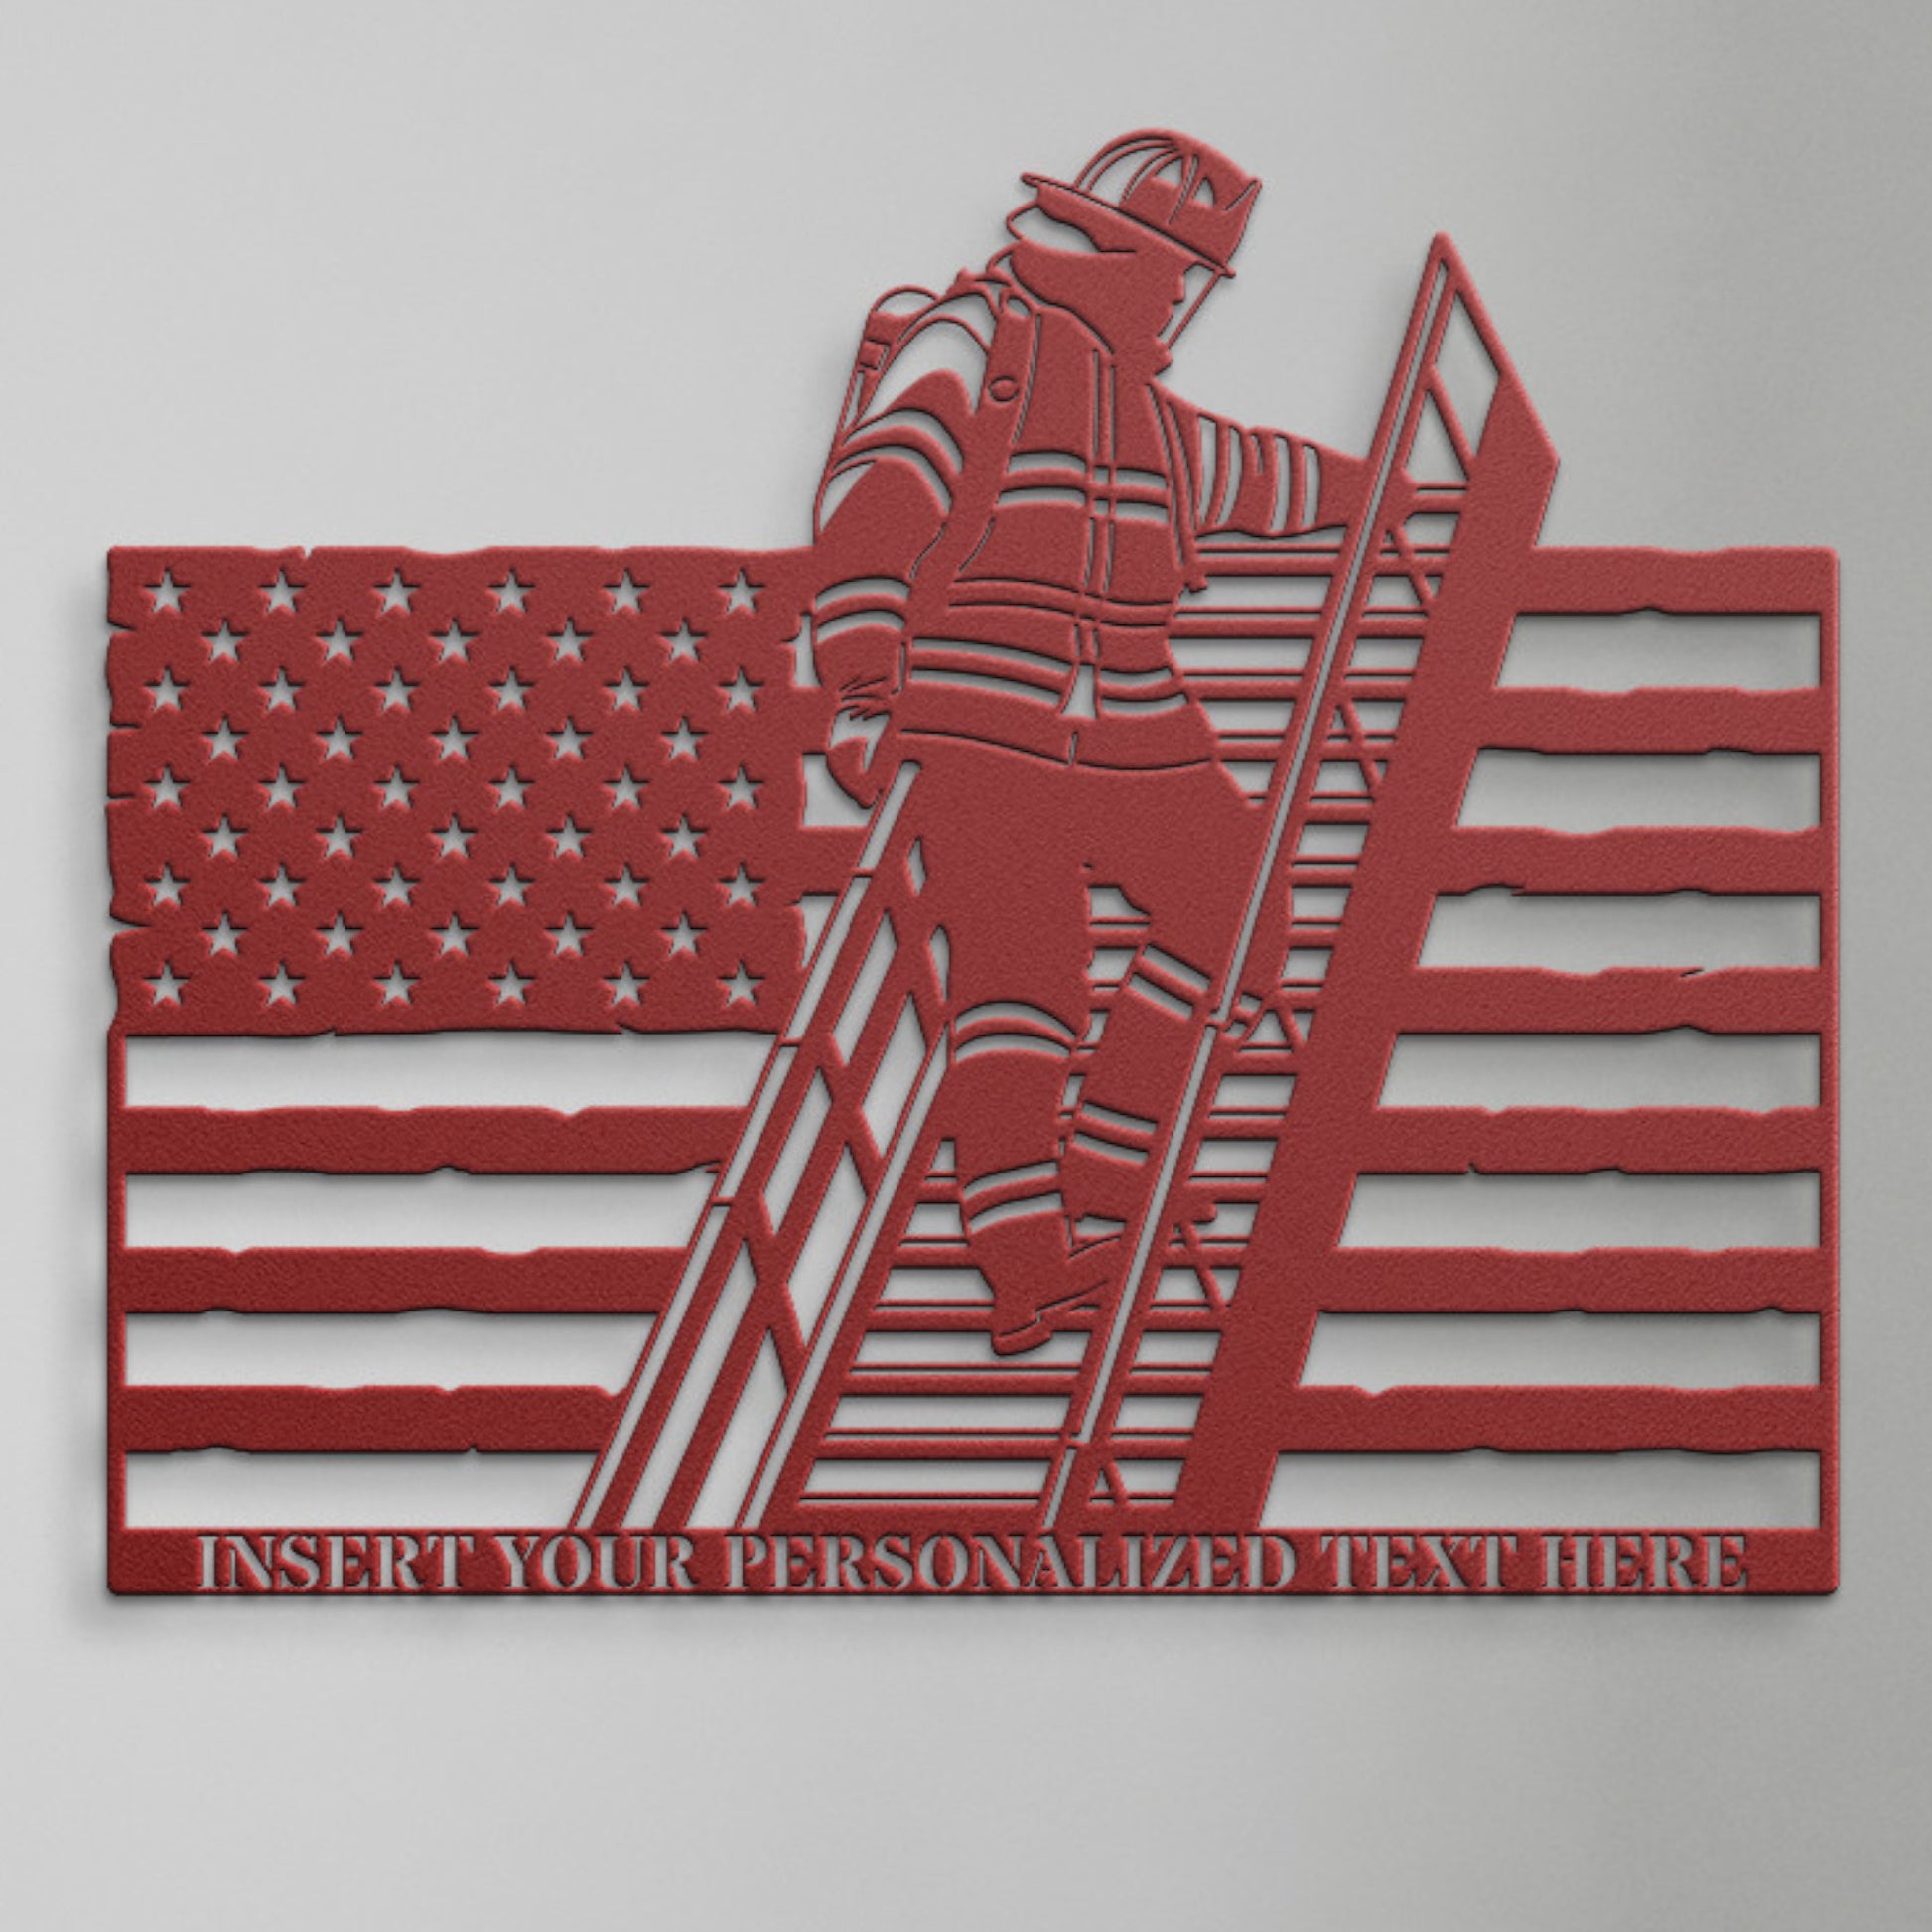 Personalized American Firefighter Metal Sign. Custom US Fireman Wall Decor Gift. Unique Firefighter Volunteer. Fire Department Wall Hanging